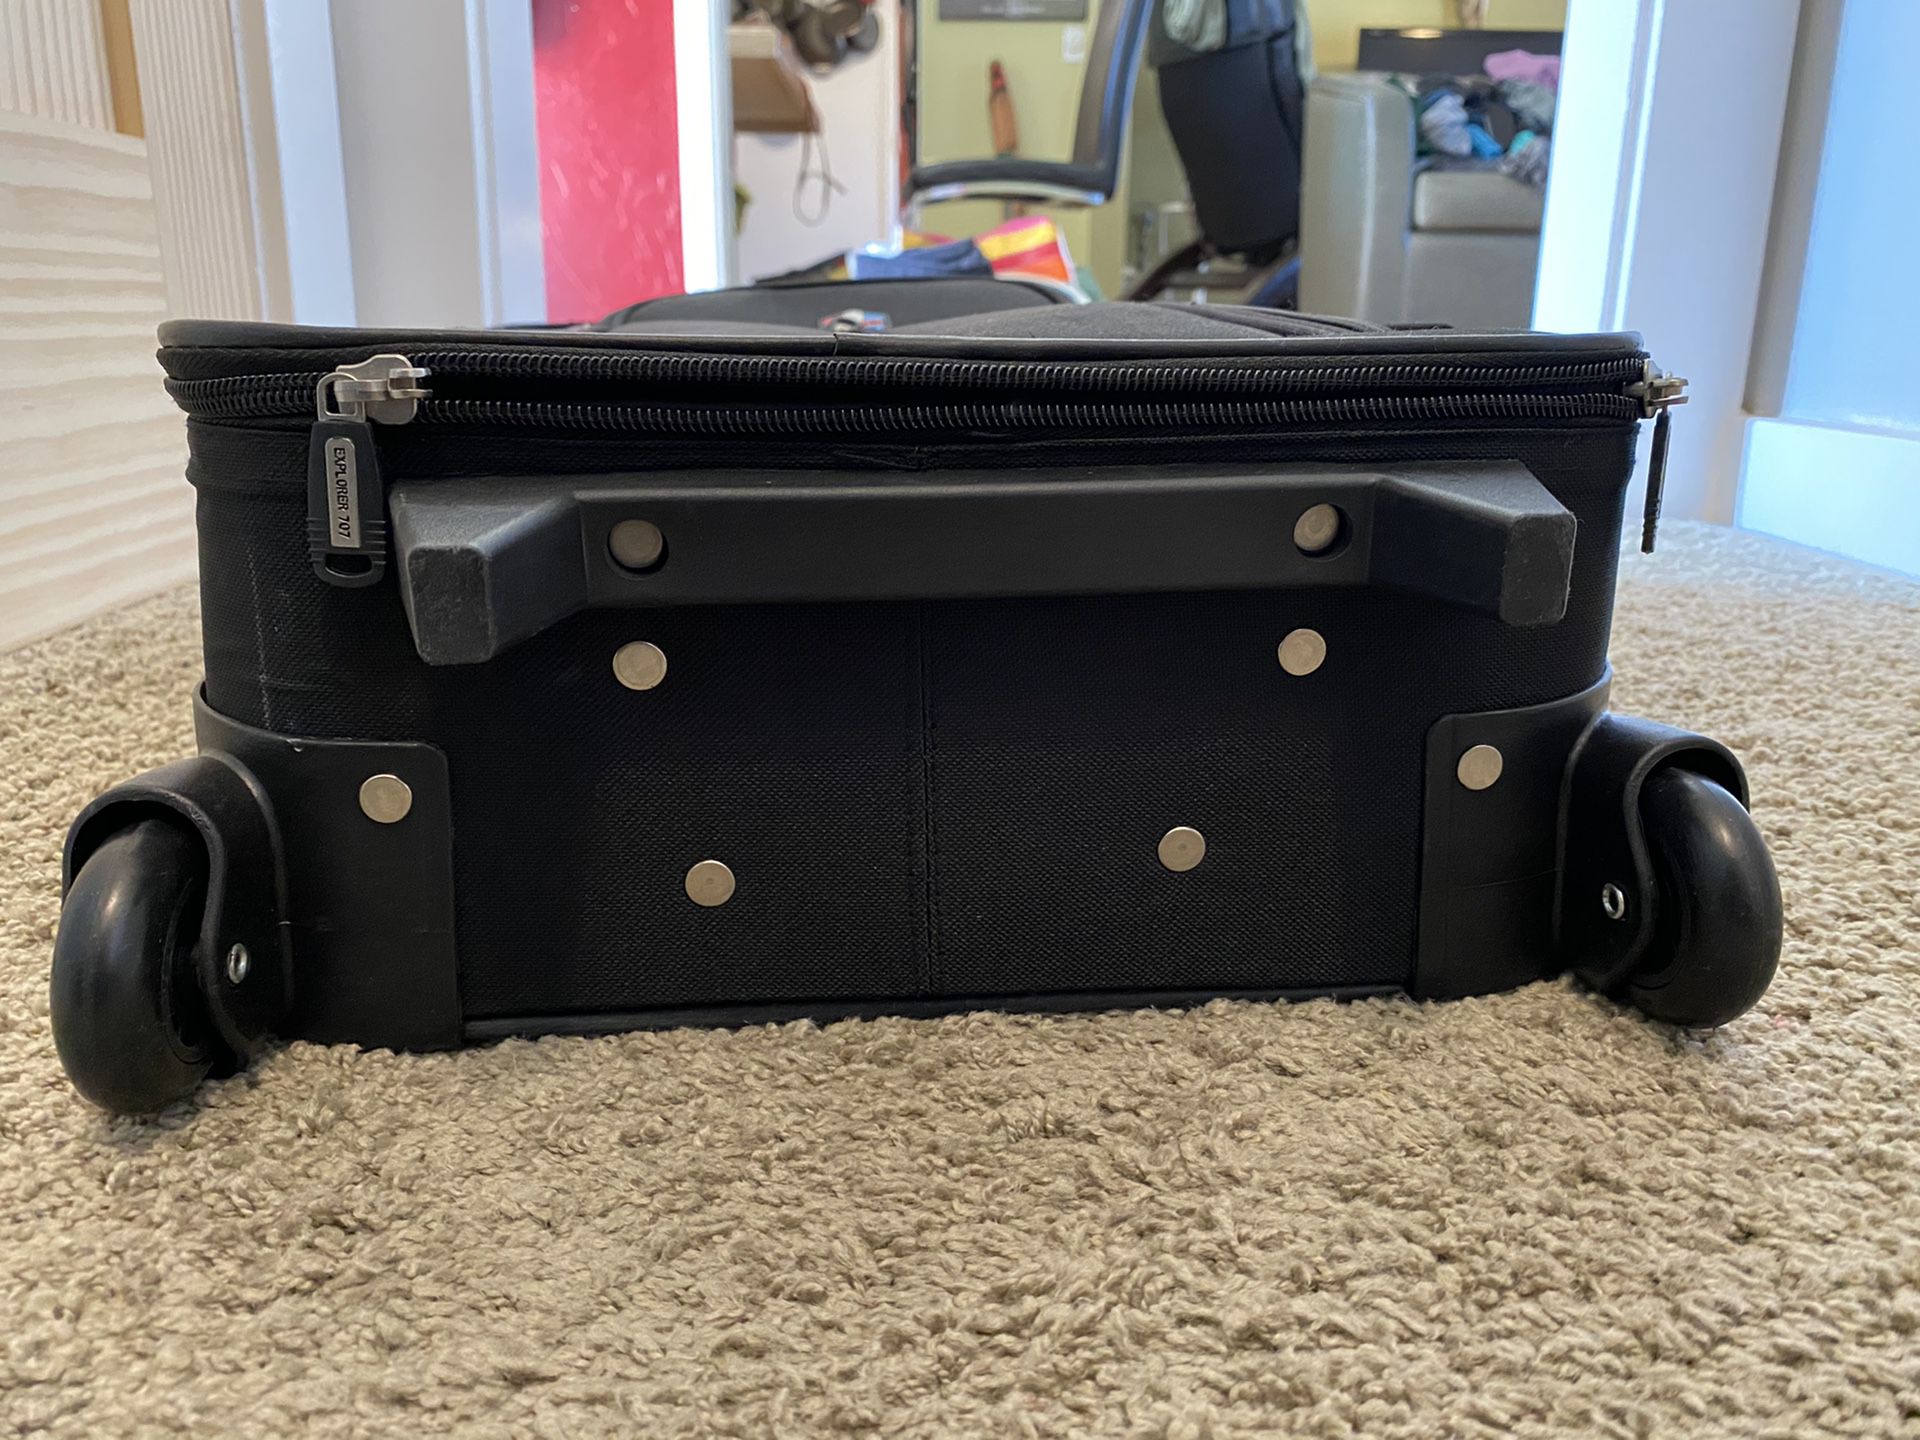 Explorer 707 suitcase for Sale in Oklahoma City, OK - OfferUp